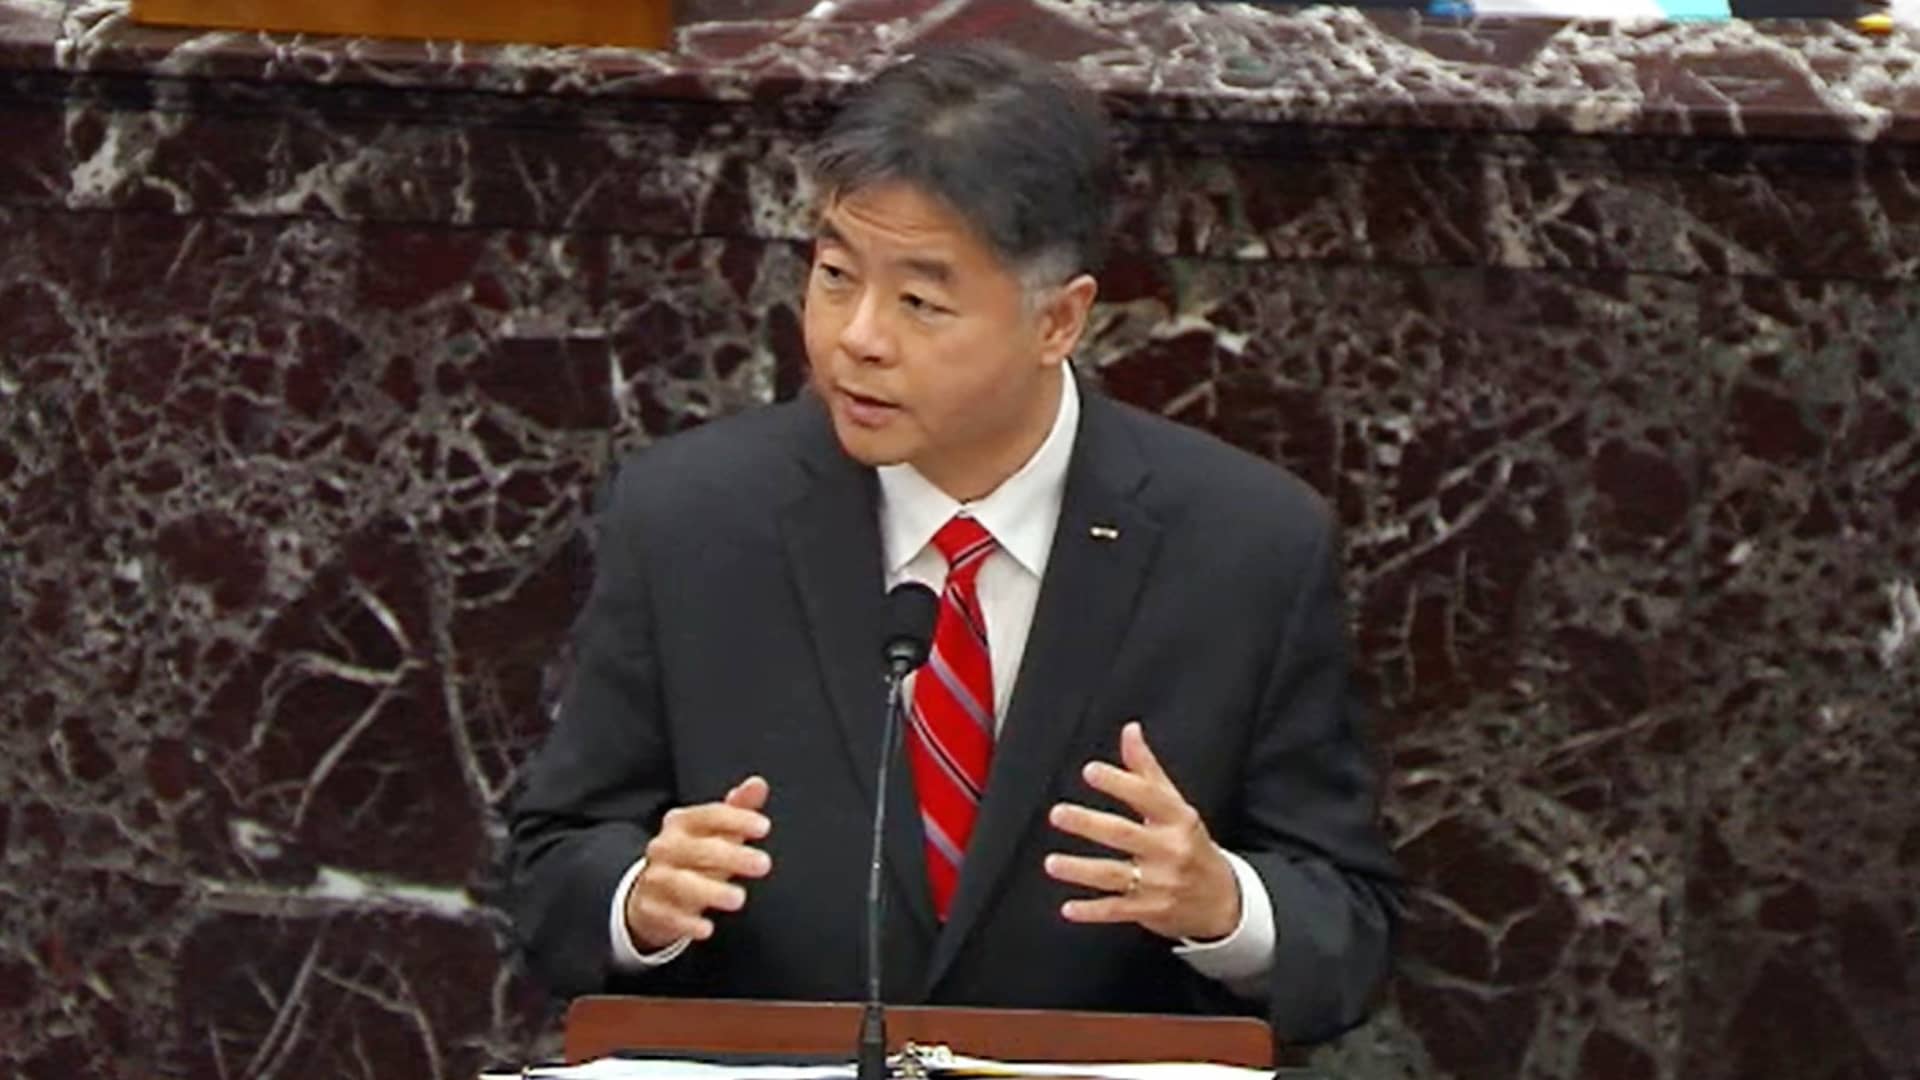 In this screenshot taken from a congress.gov webcast, Rep. Ted Lieu (D-CA) speaks on the third day of former President Donald Trump's second impeachment trial at the U.S. Capitol on February 11, 2021 in Washington, DC.